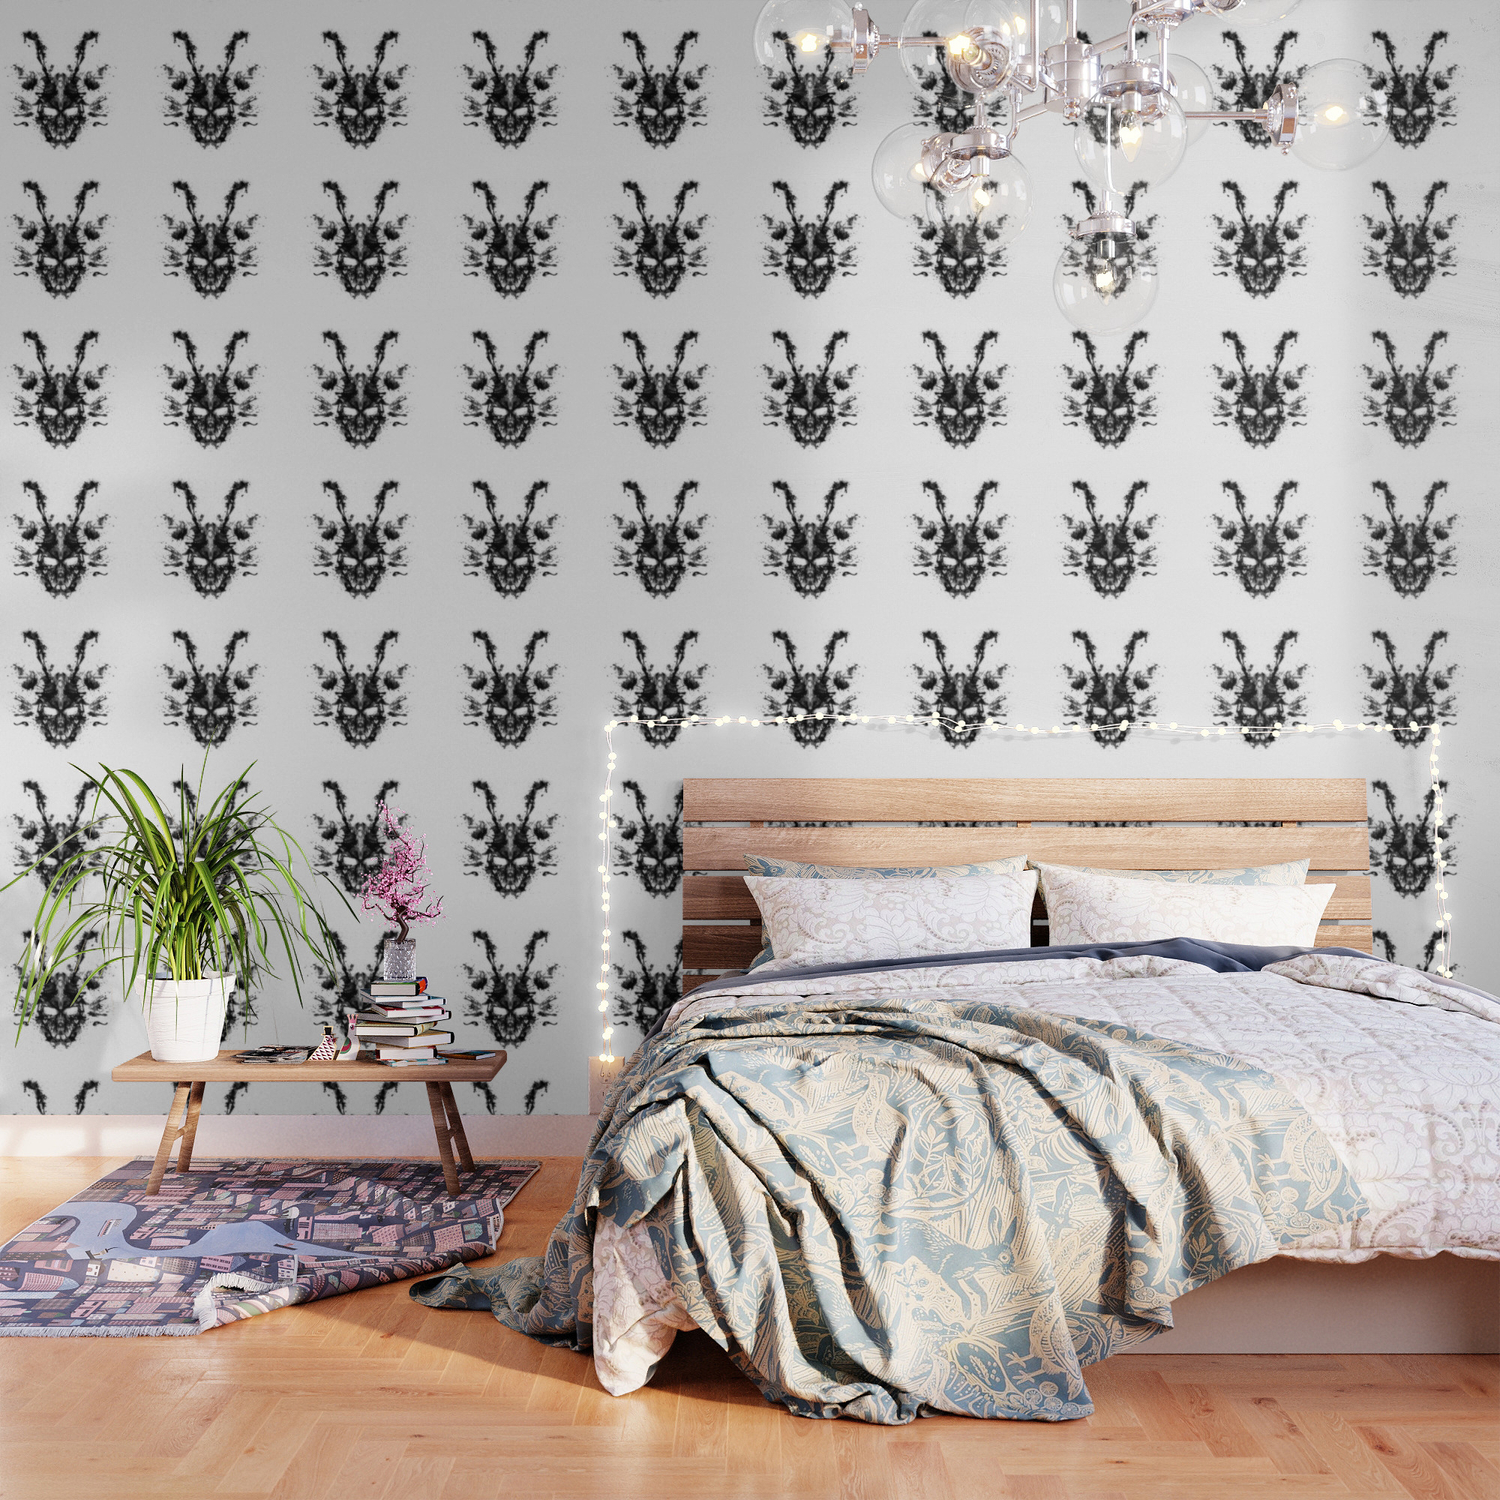 Frank (Donnie Darko). Ink Blot Painting Wallpaper by The Visual Creator |  Society6